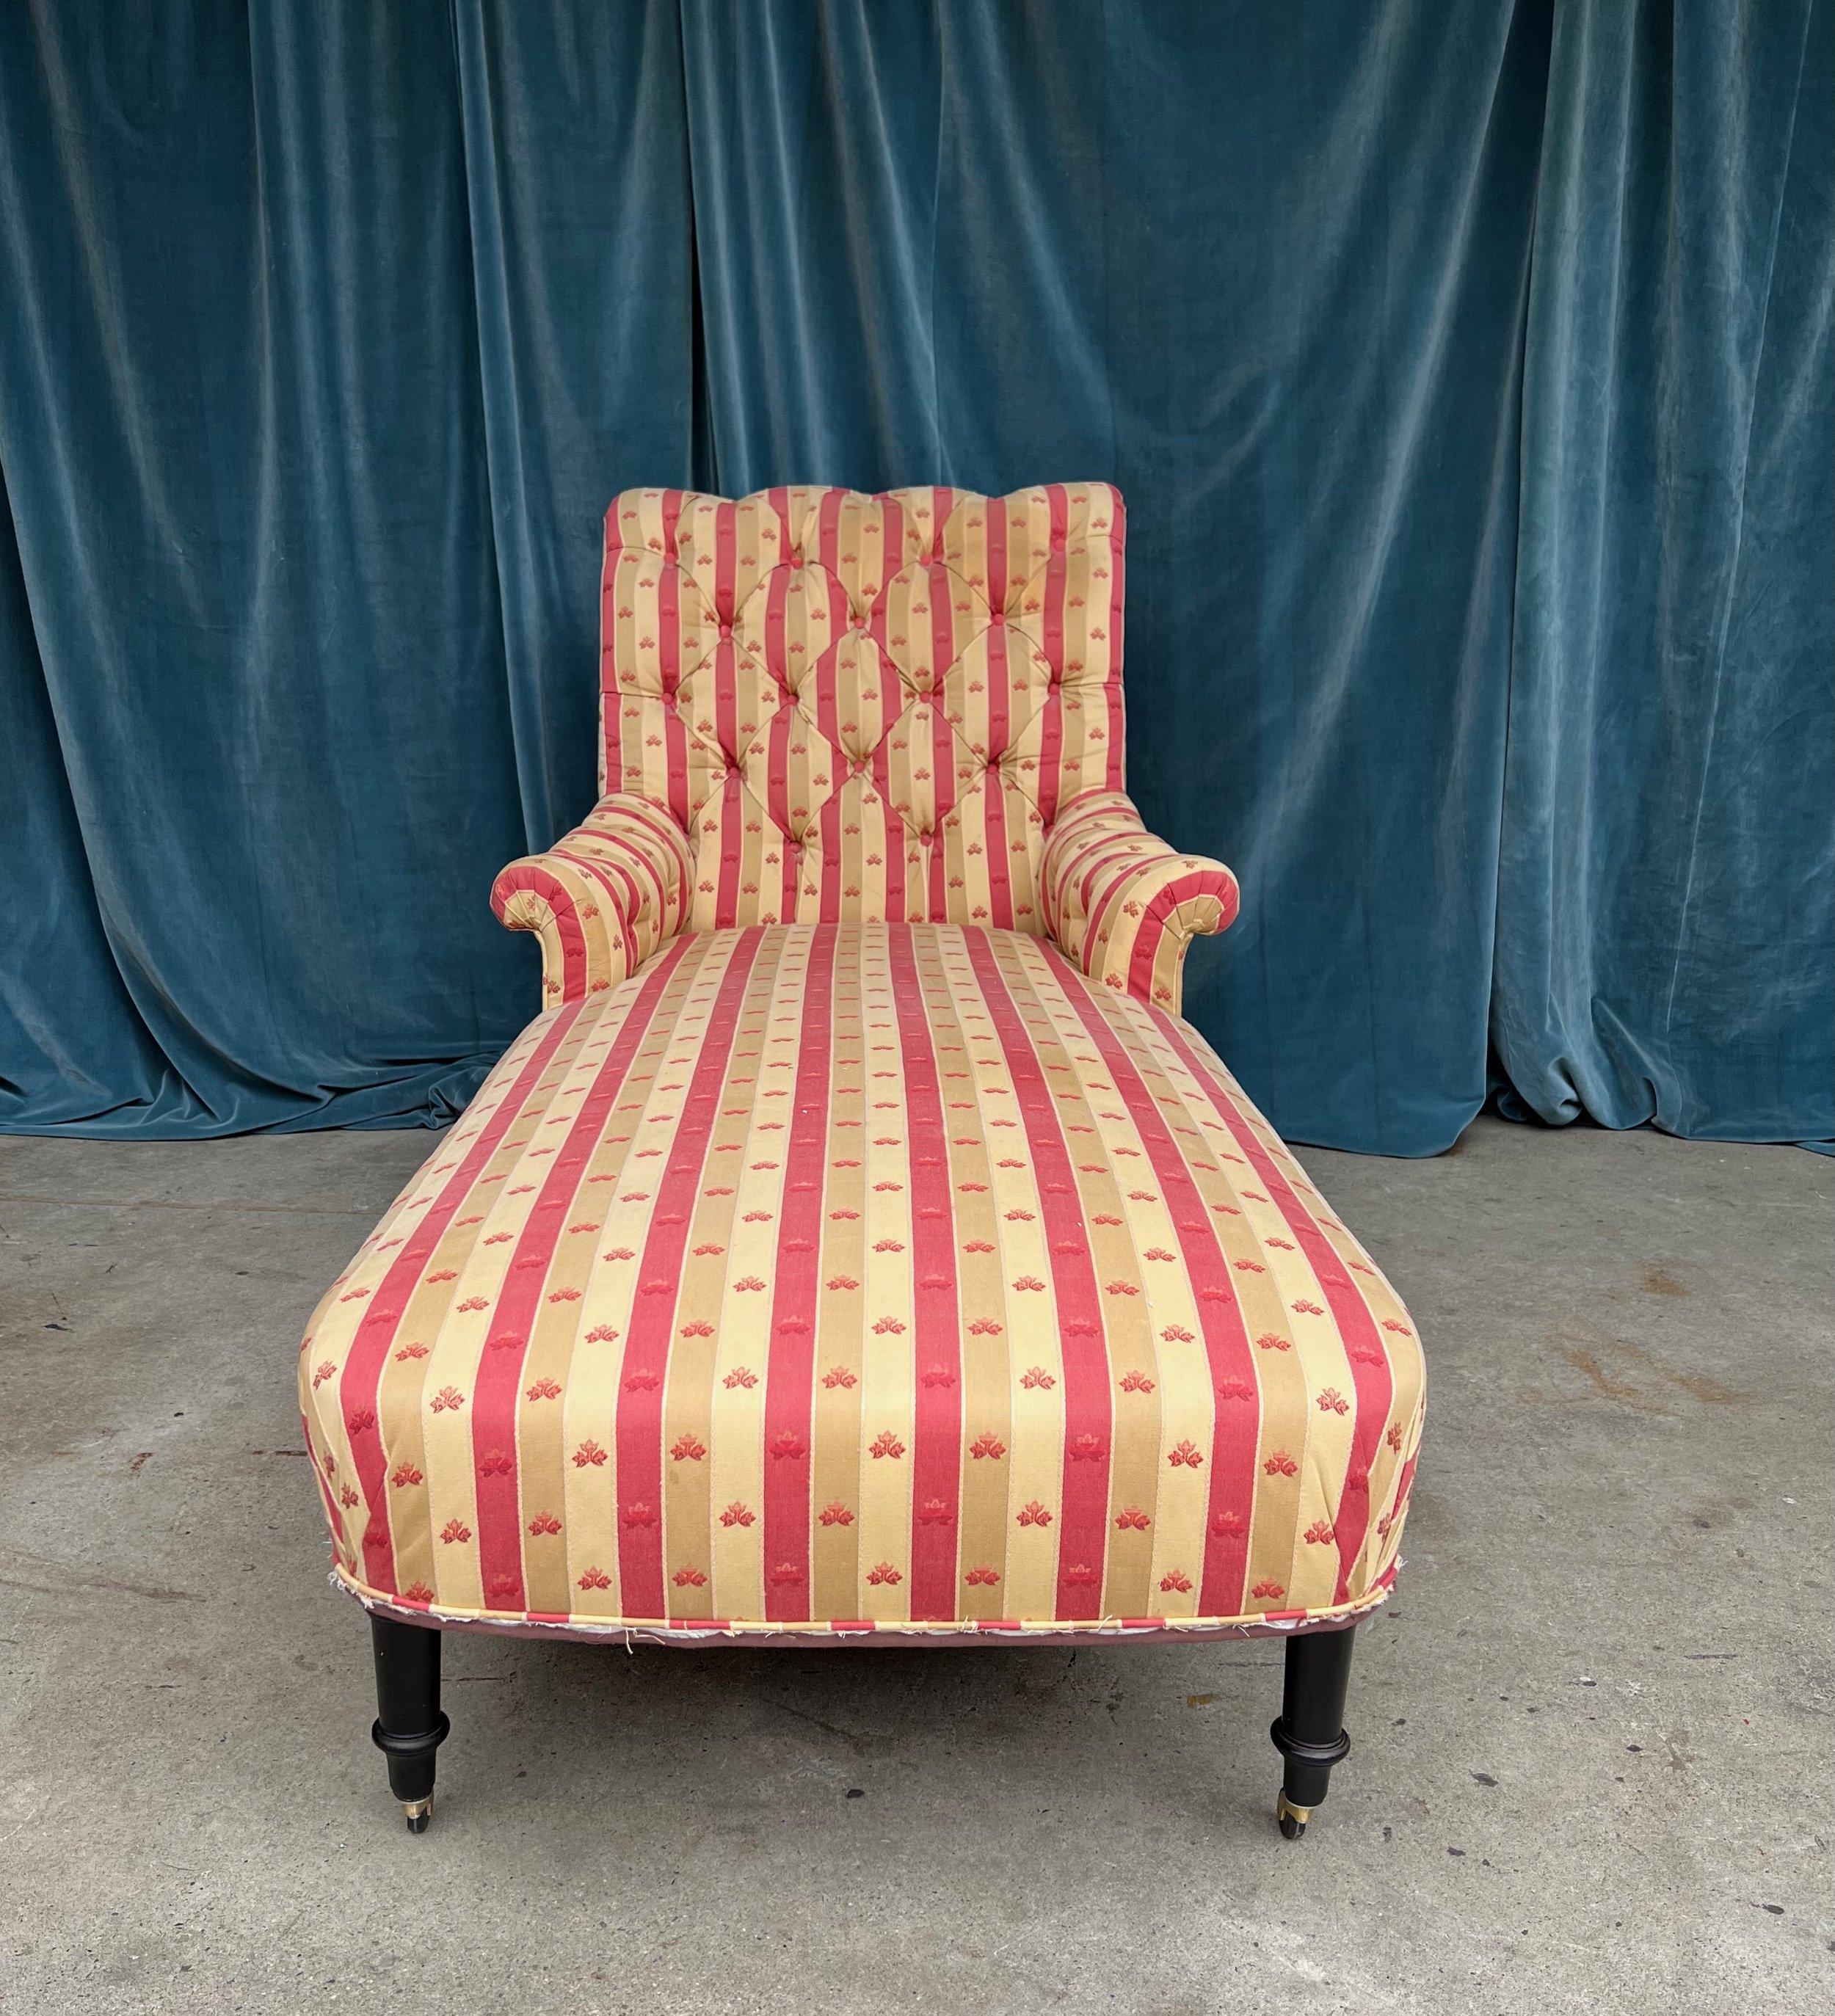 Upholstery Large French Scrolled Back Chaise Longue in Striped Patterned Fabric  For Sale